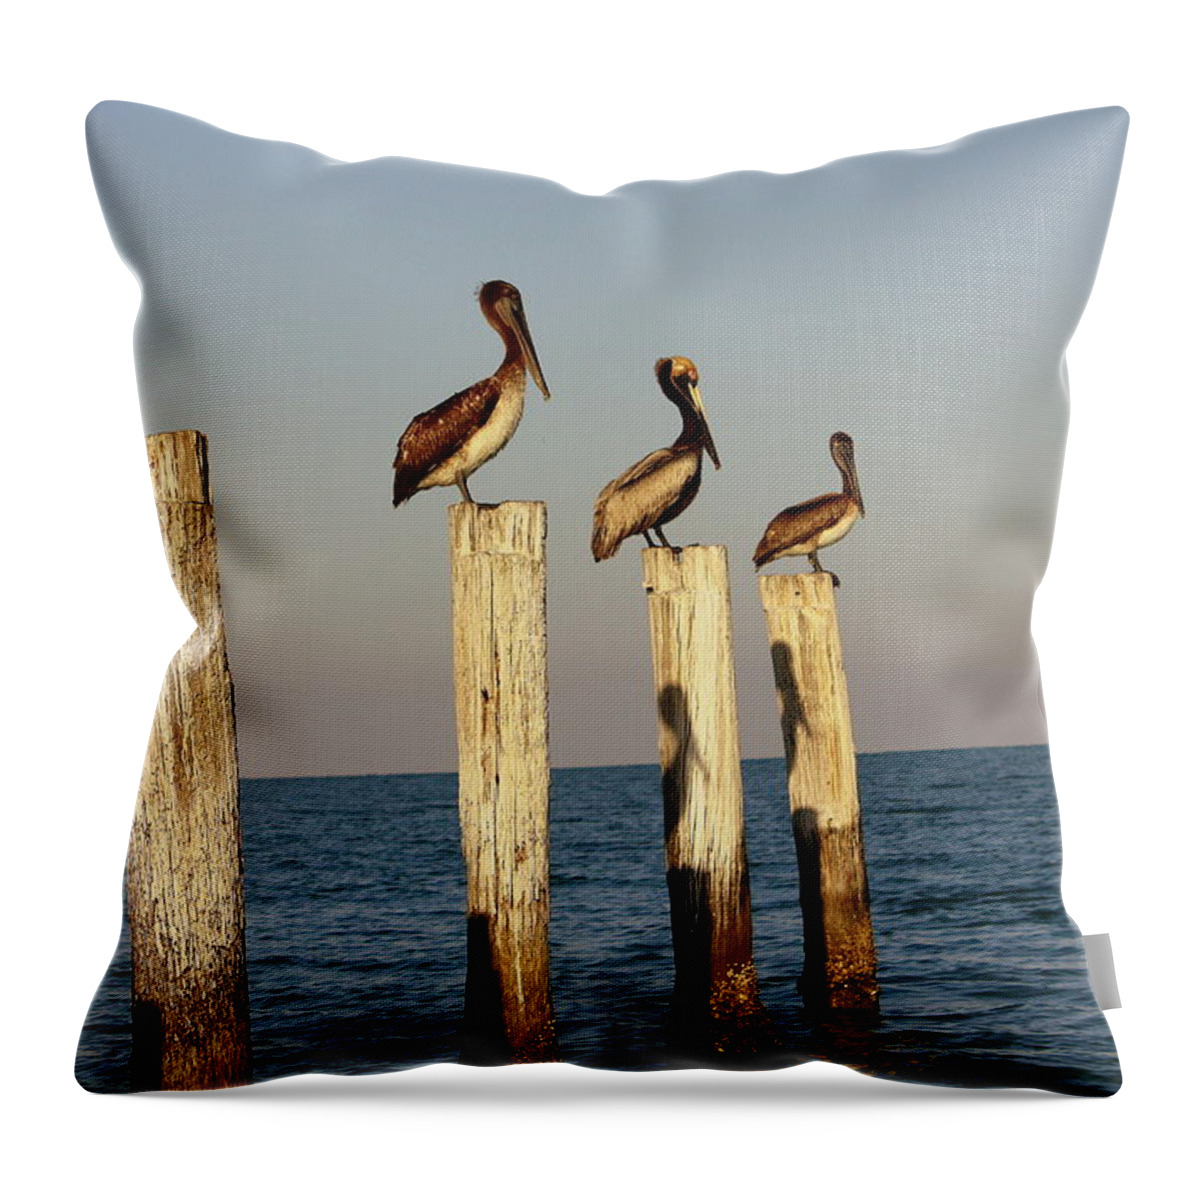 Florida Throw Pillow featuring the photograph Fashionably Late by Andrea Platt